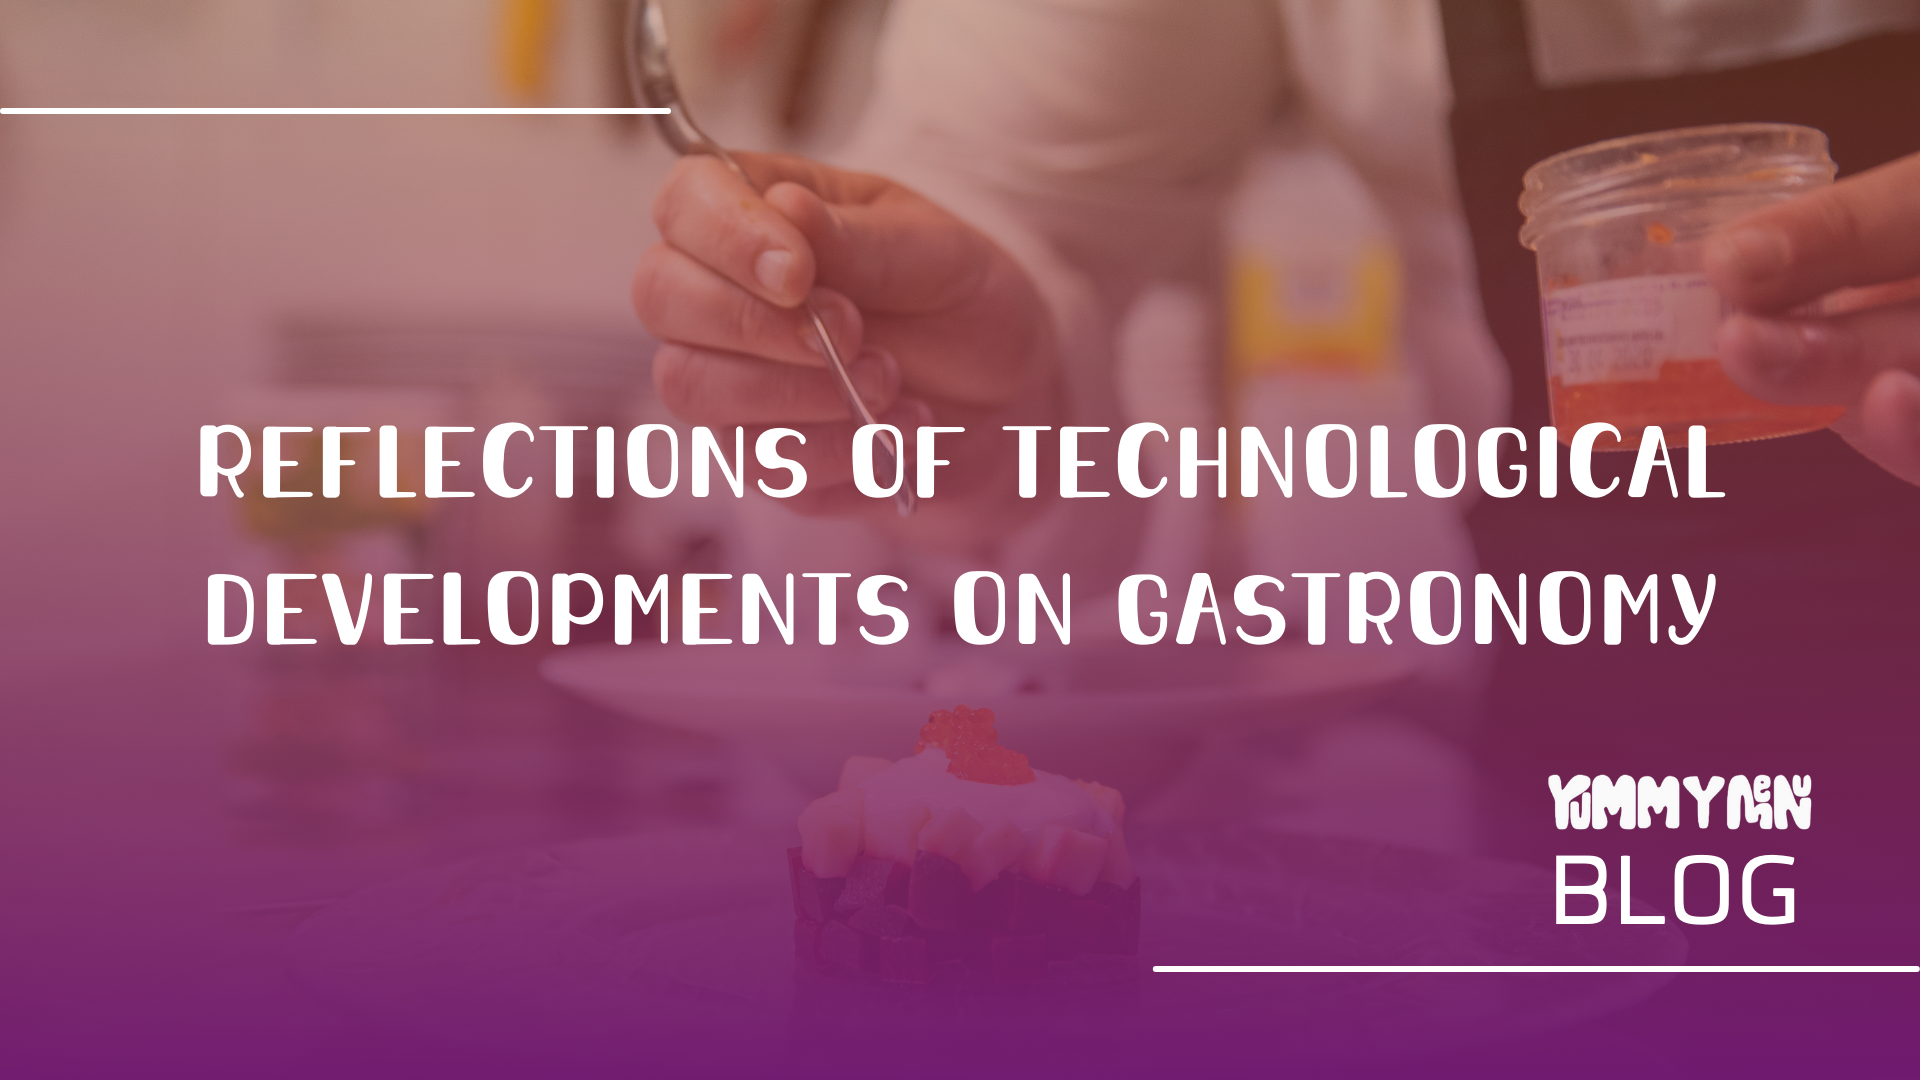 Reflections of Technological Developments on Gastronomy